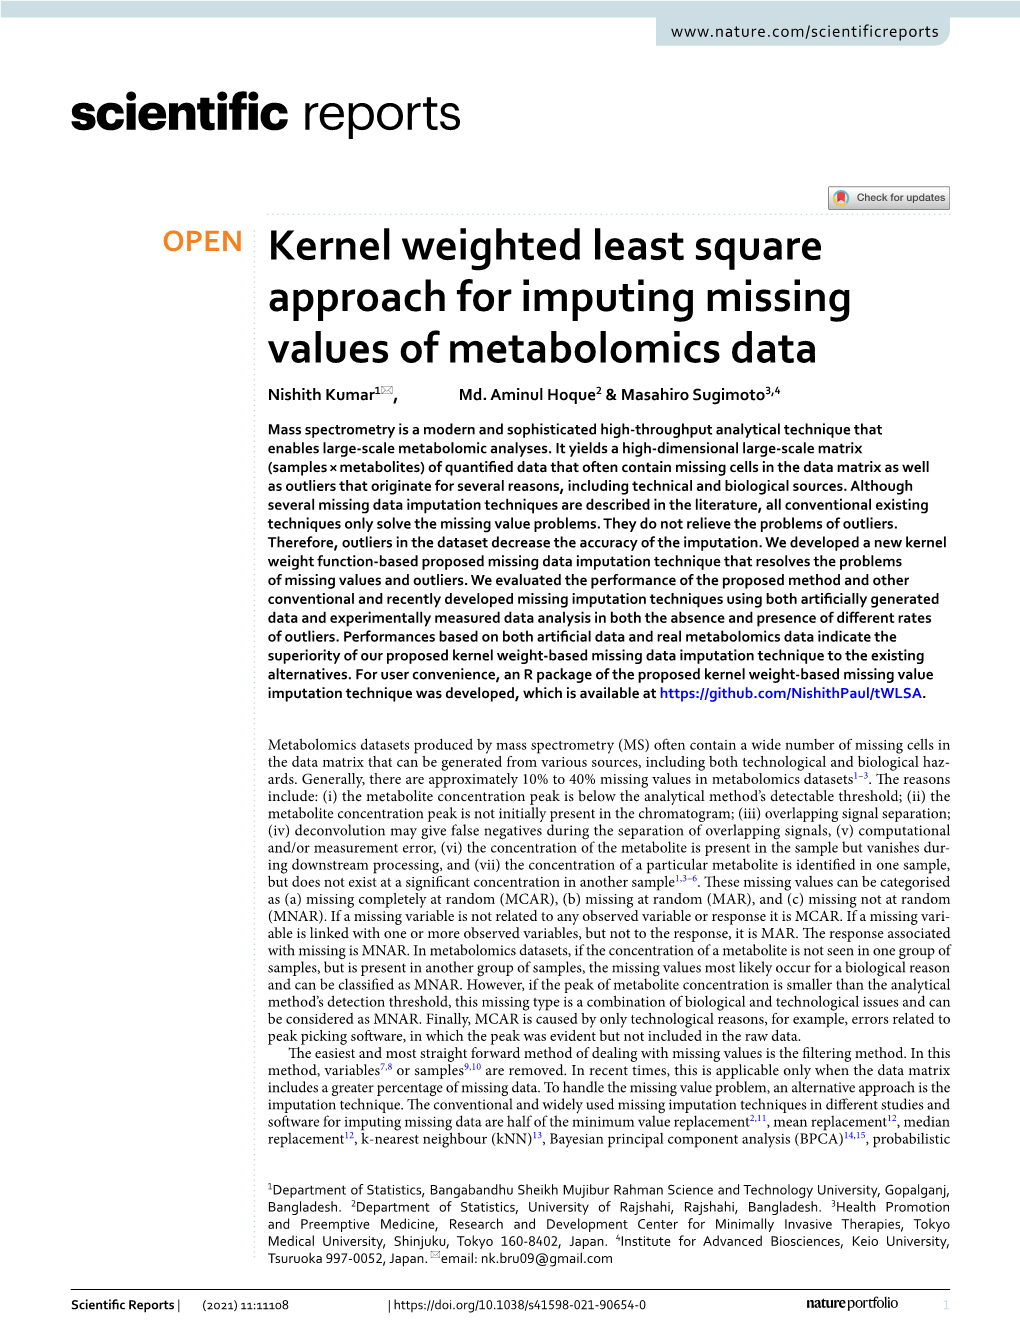 Kernel Weighted Least Square Approach for Imputing Missing Values of Metabolomics Data Nishith Kumar1*, Md